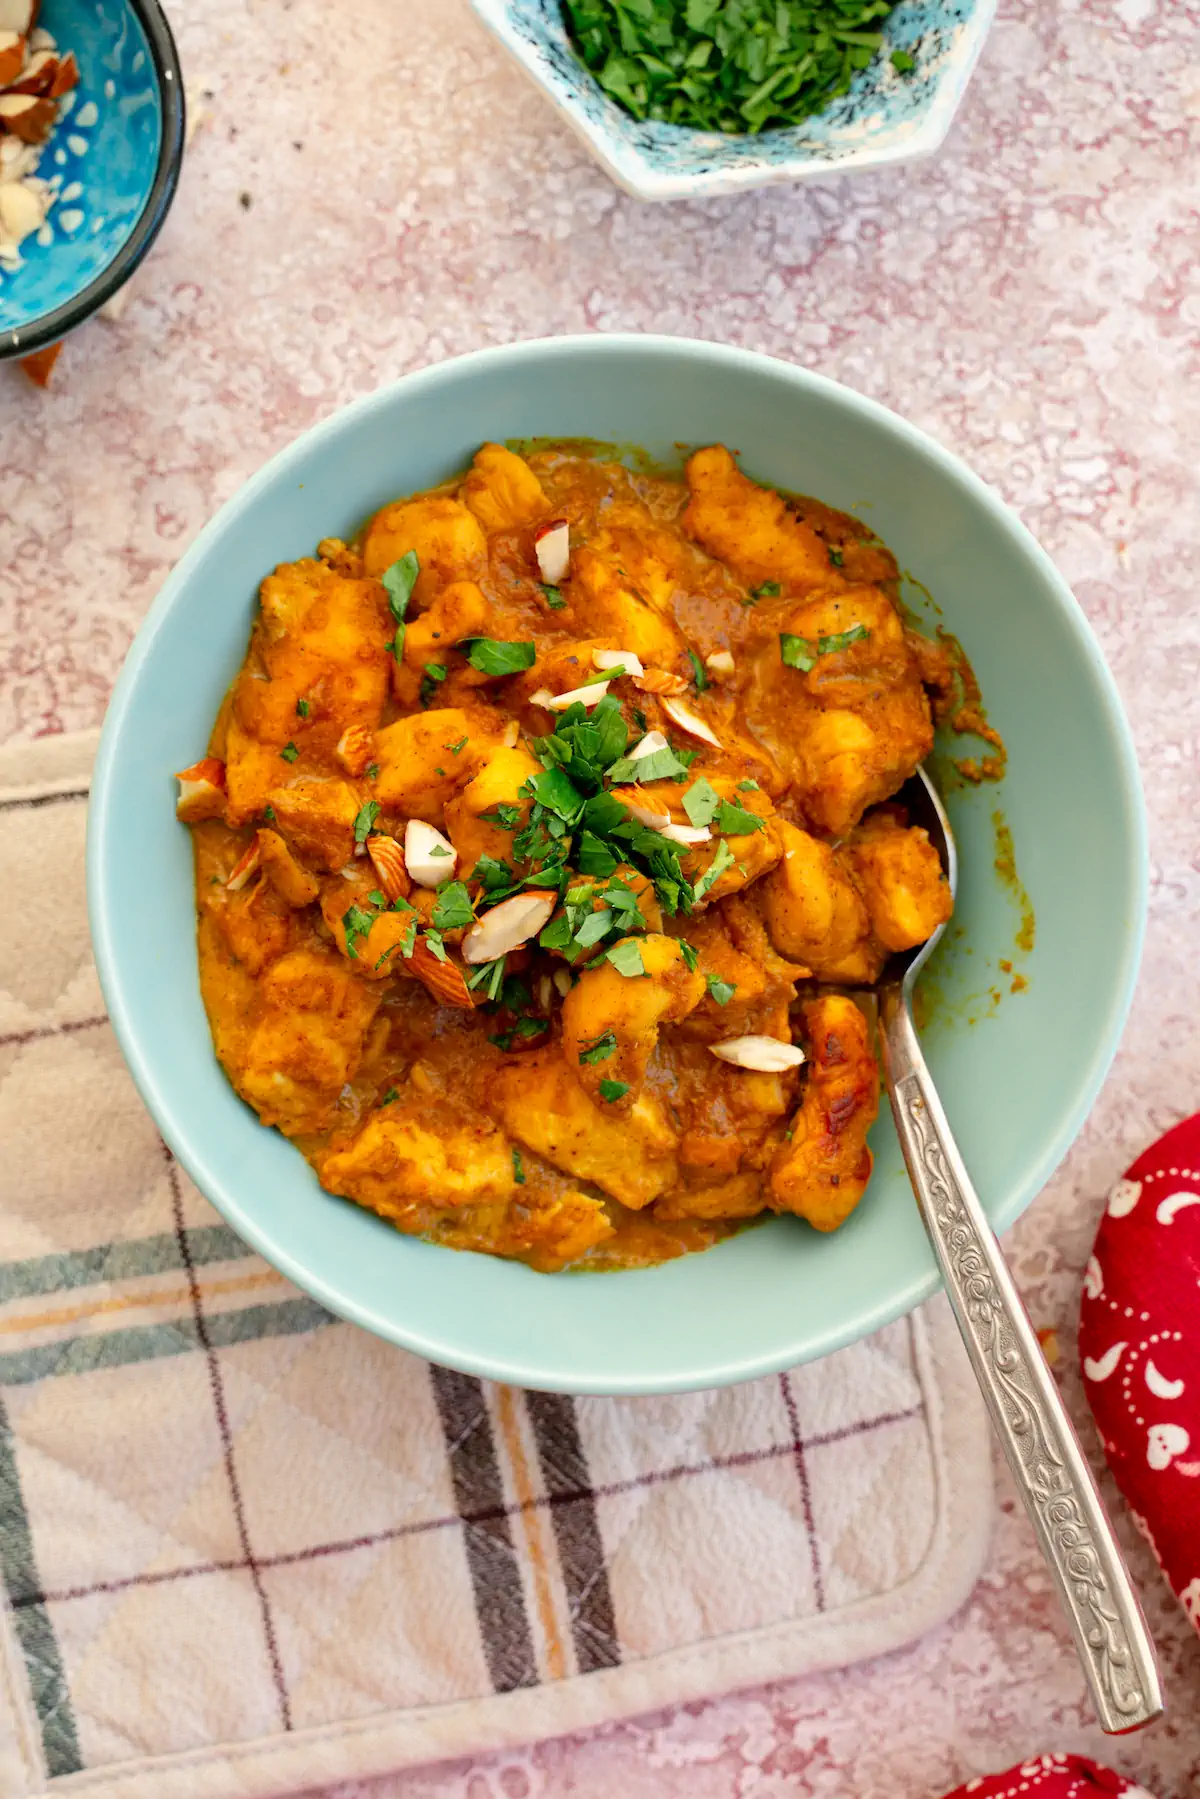 Chicken korma in a bowl, topped with almonds and fresh herbs, and served with a spoon.